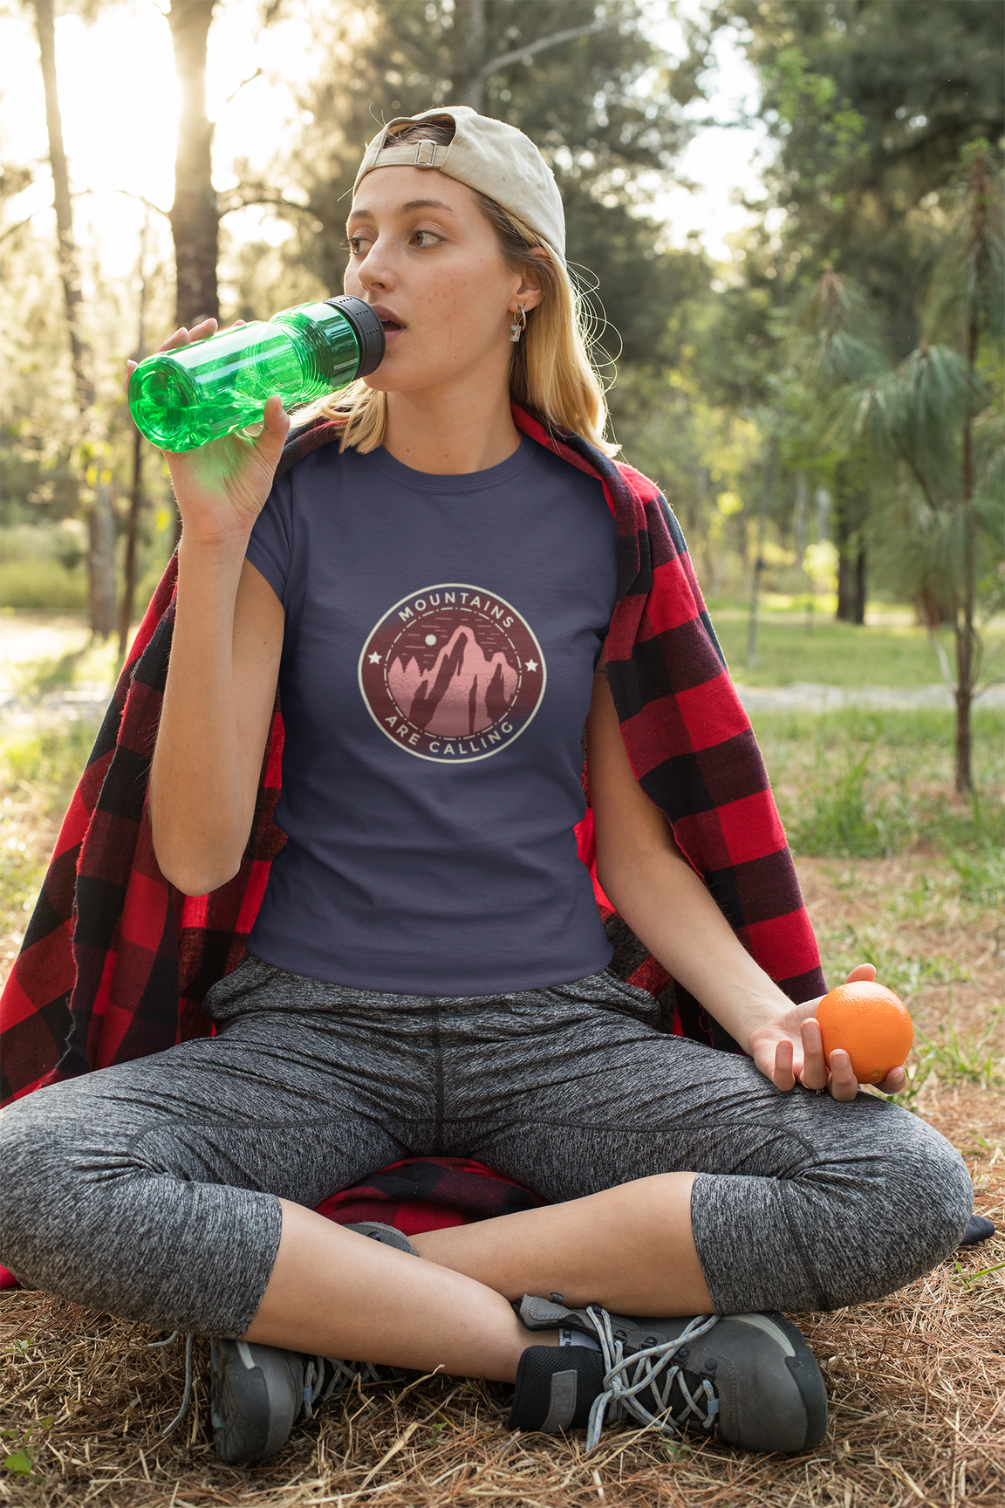 Mountains Are Calling Printed T-Shirt For Women - WowWaves - 3